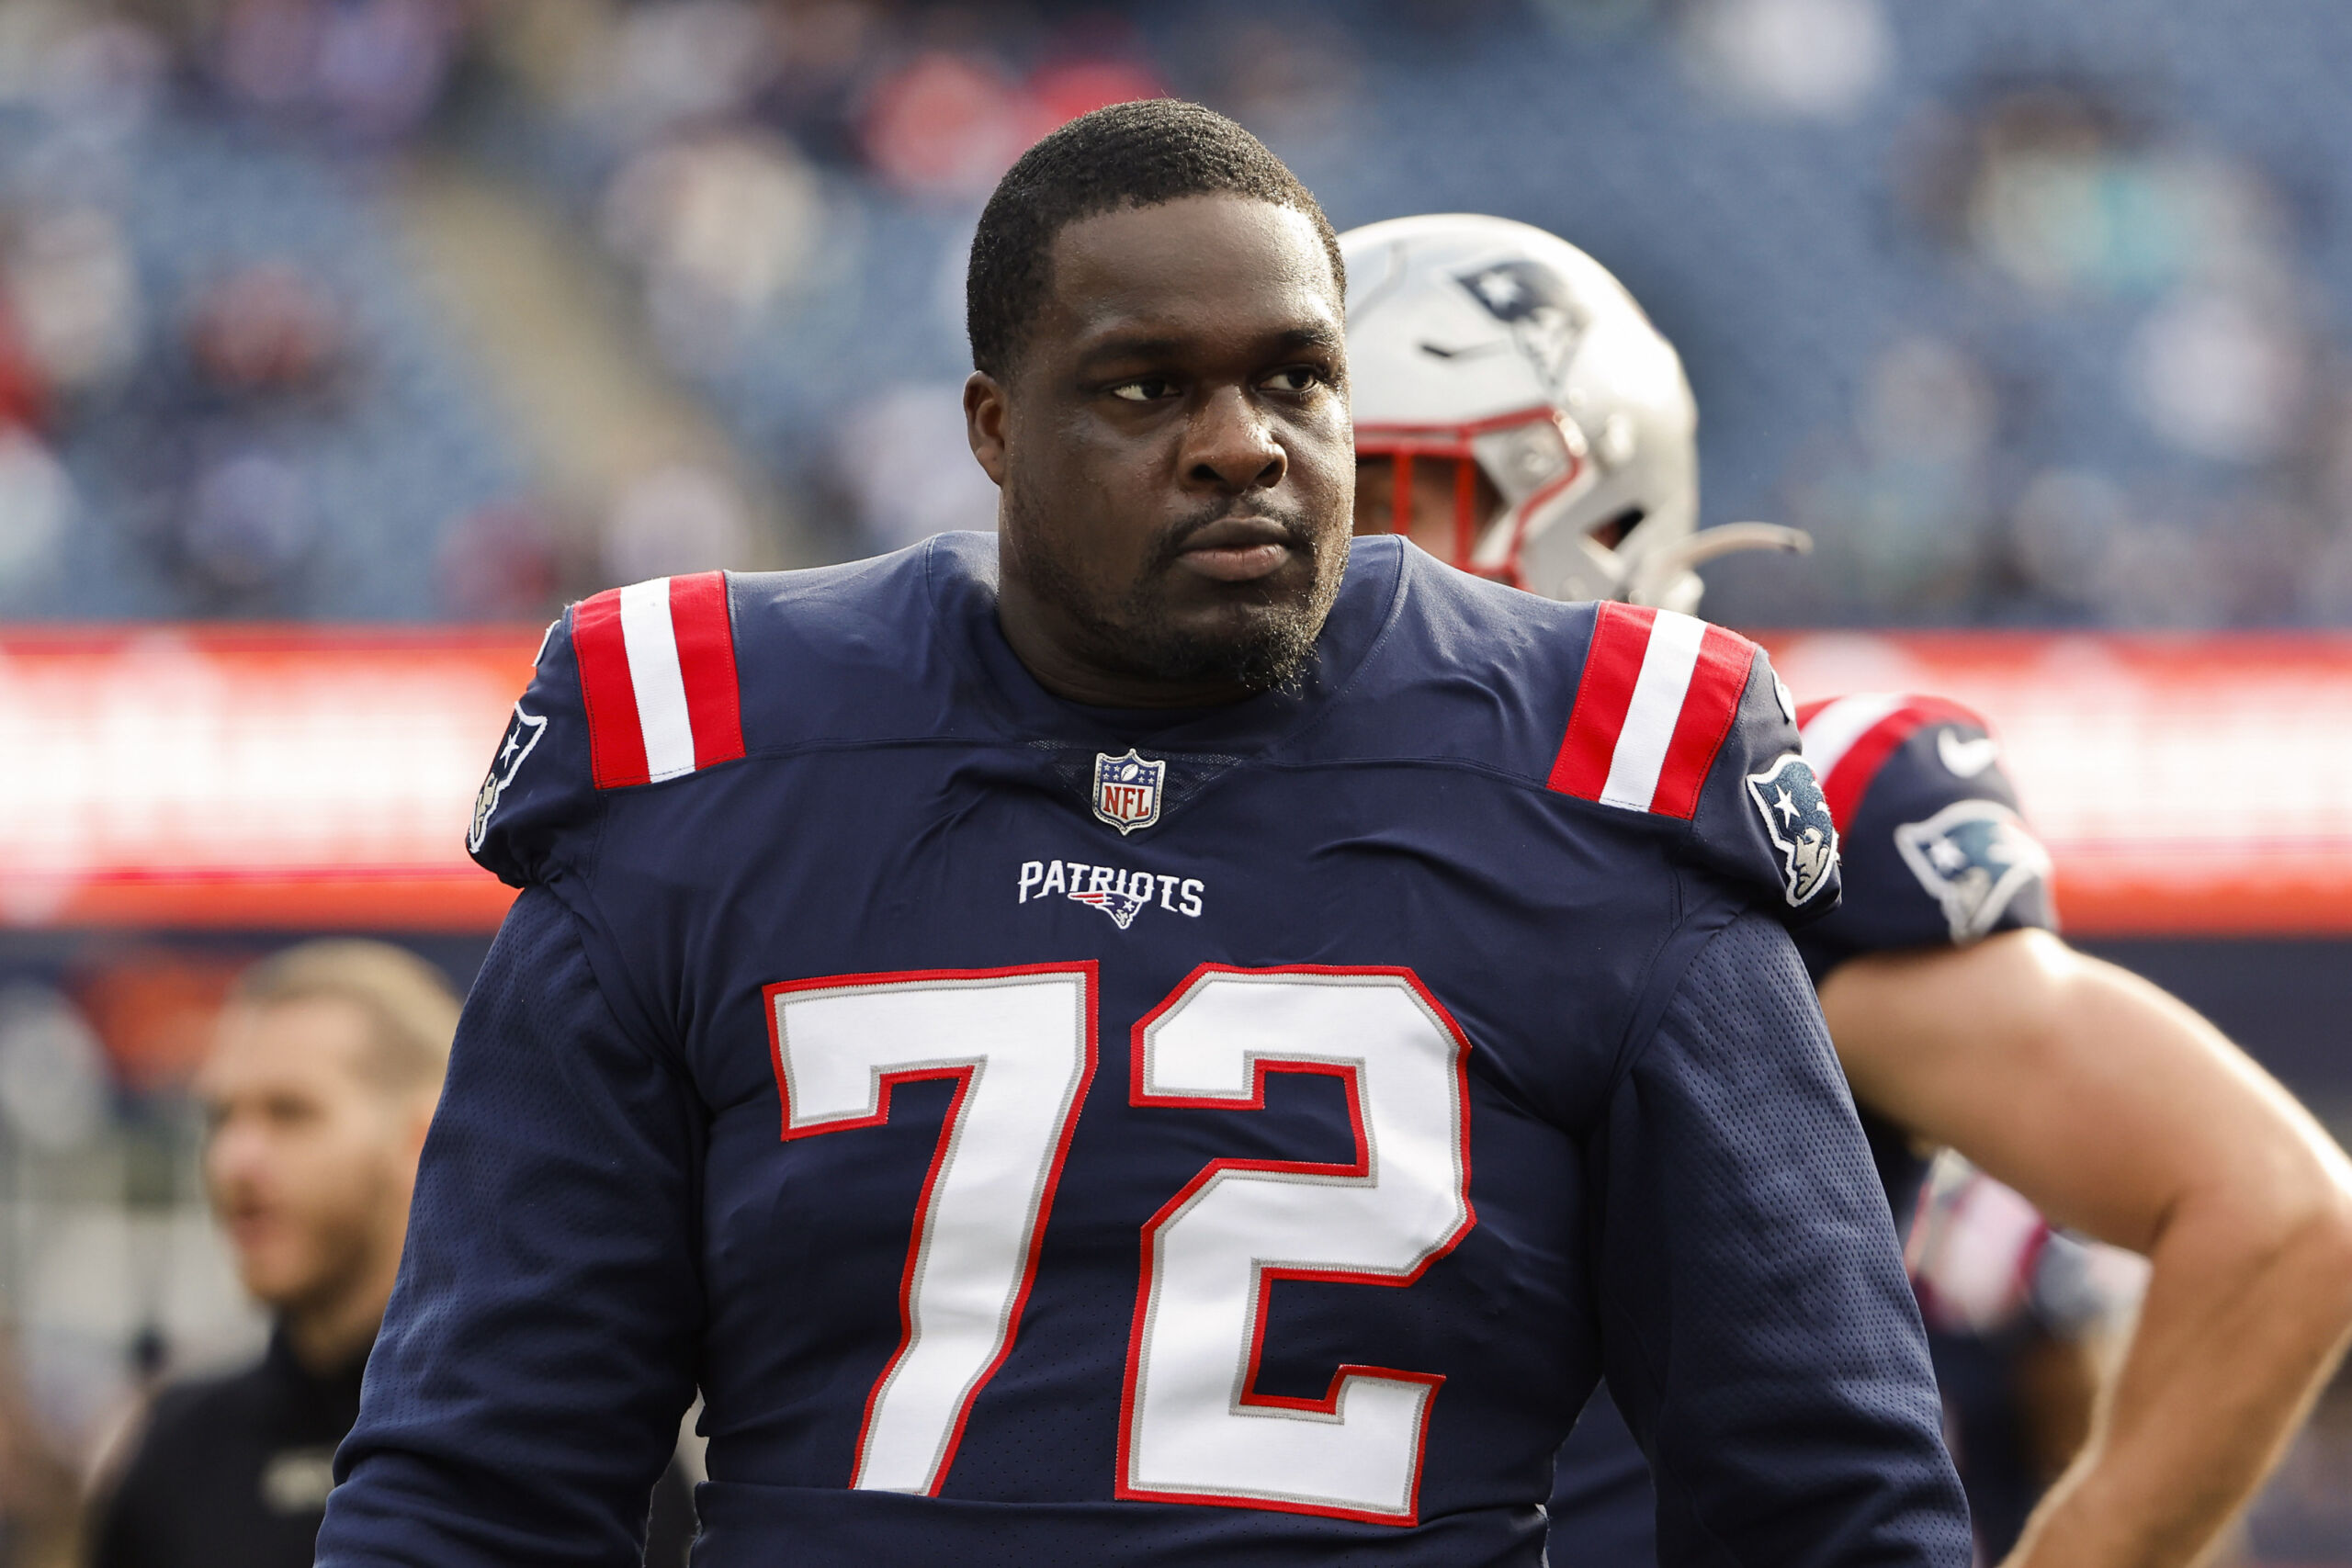 New England Patriots 2019 NFL Draft class was an absolute disaster